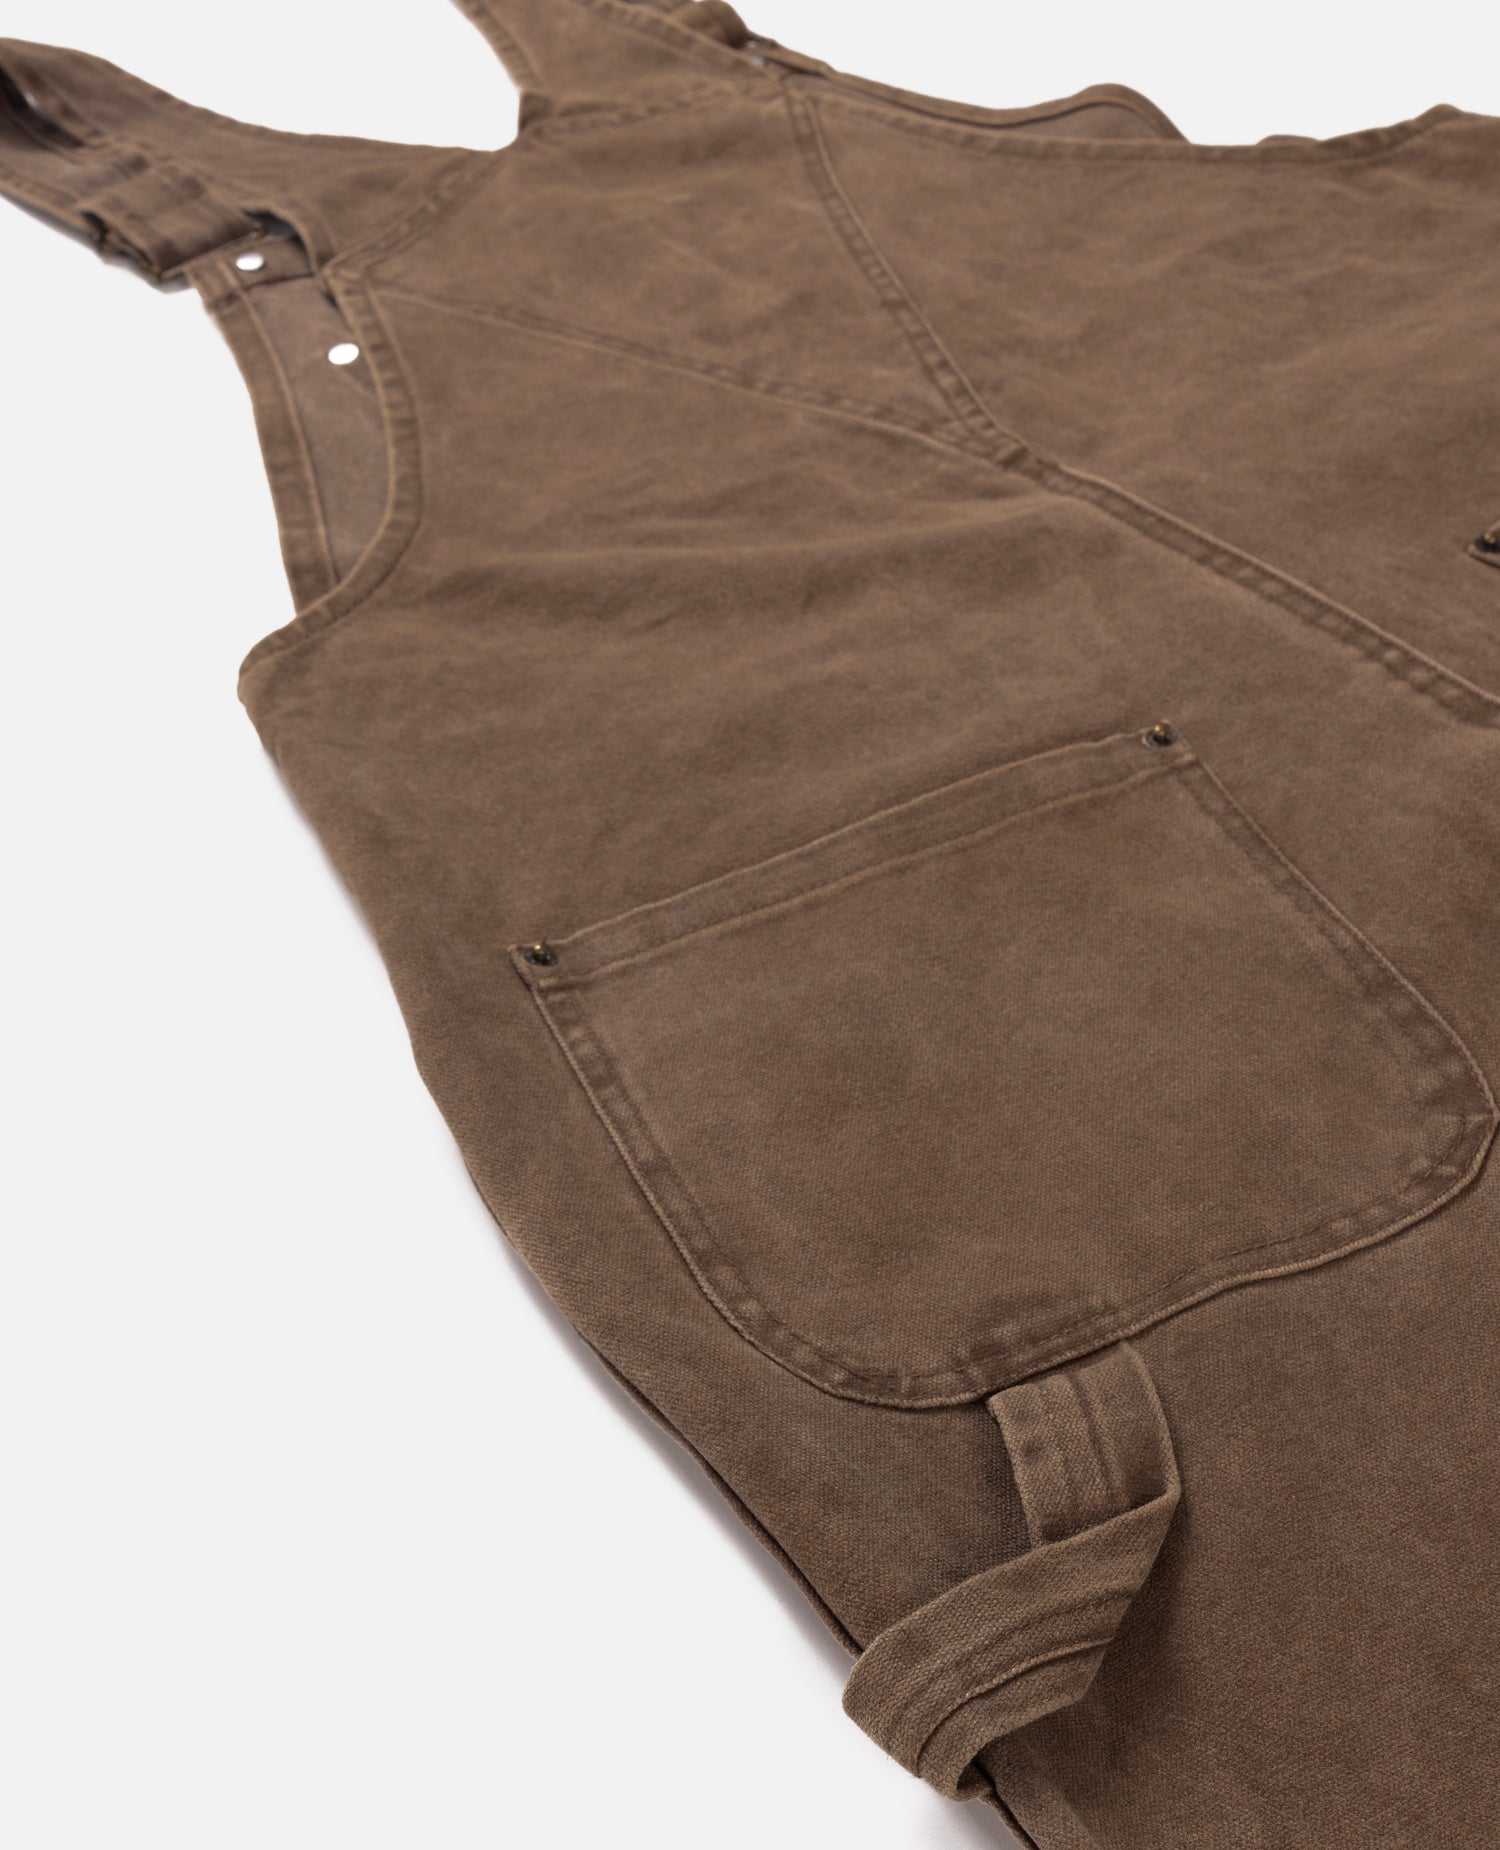 Patta Canvas Overalls (Washed Brown)